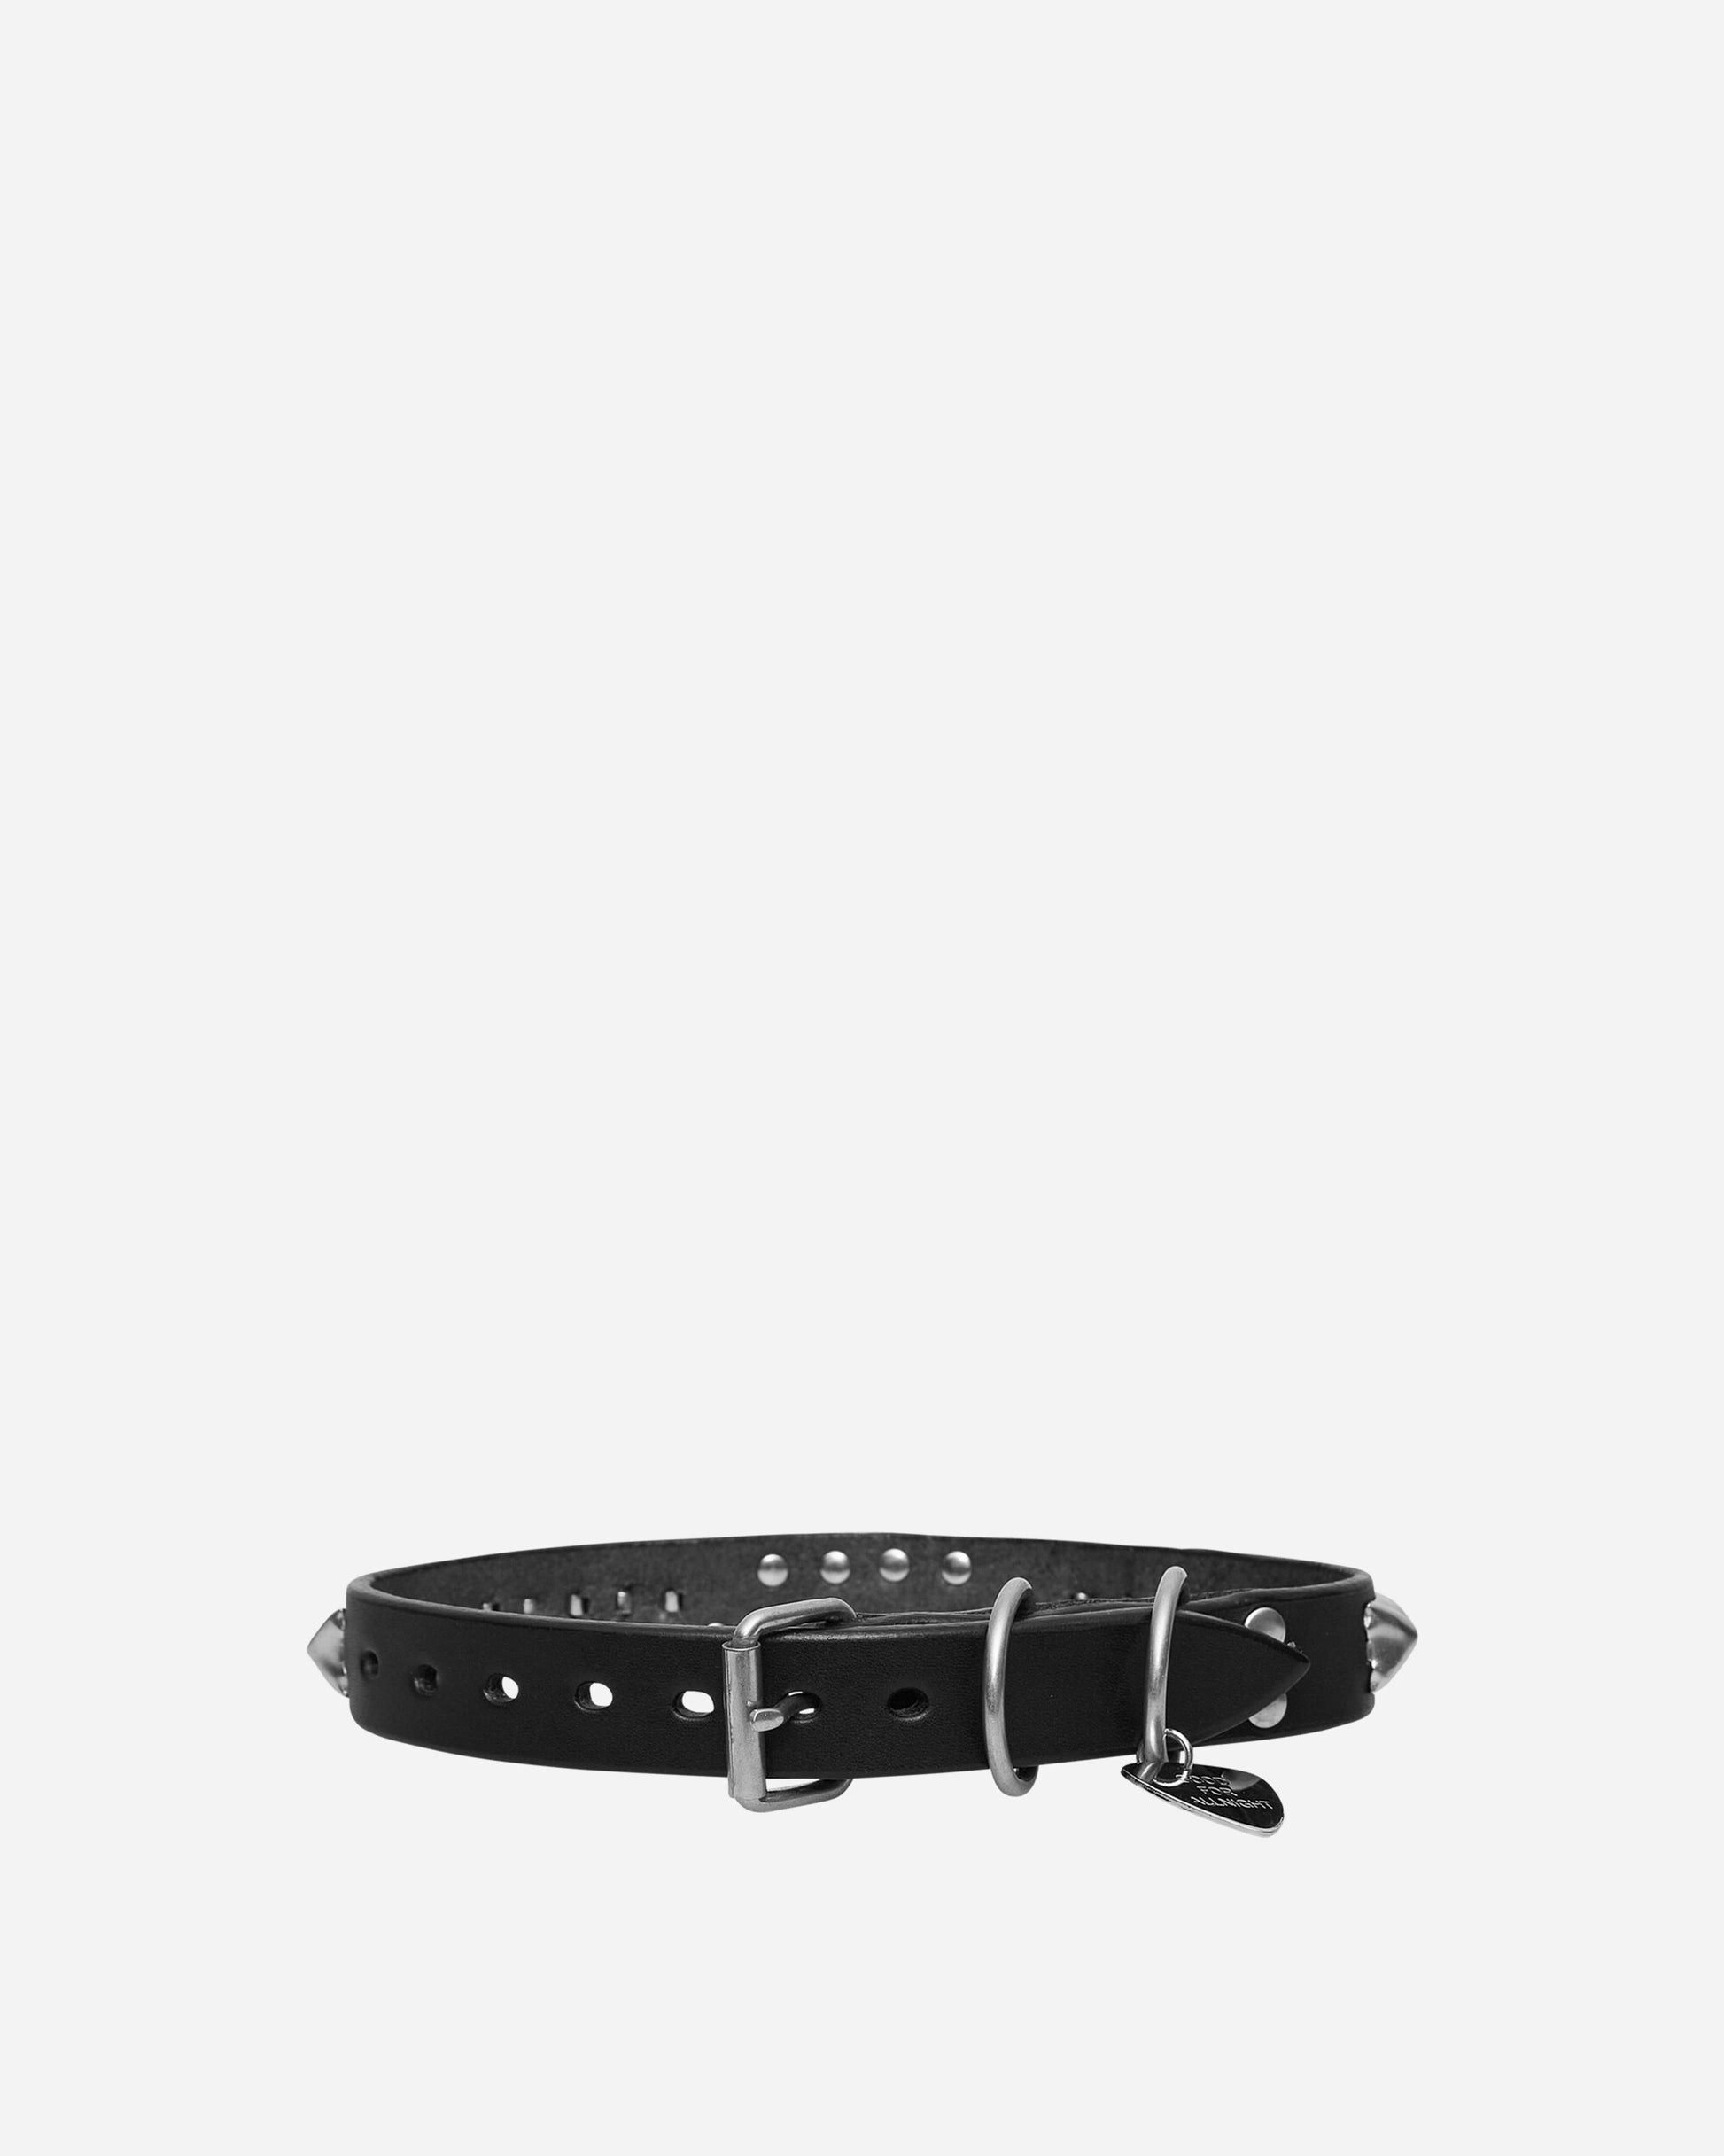 Hysteric Glamour Wmns Studs Choker Black Jewellery Necklaces 01233QG059 BLACK